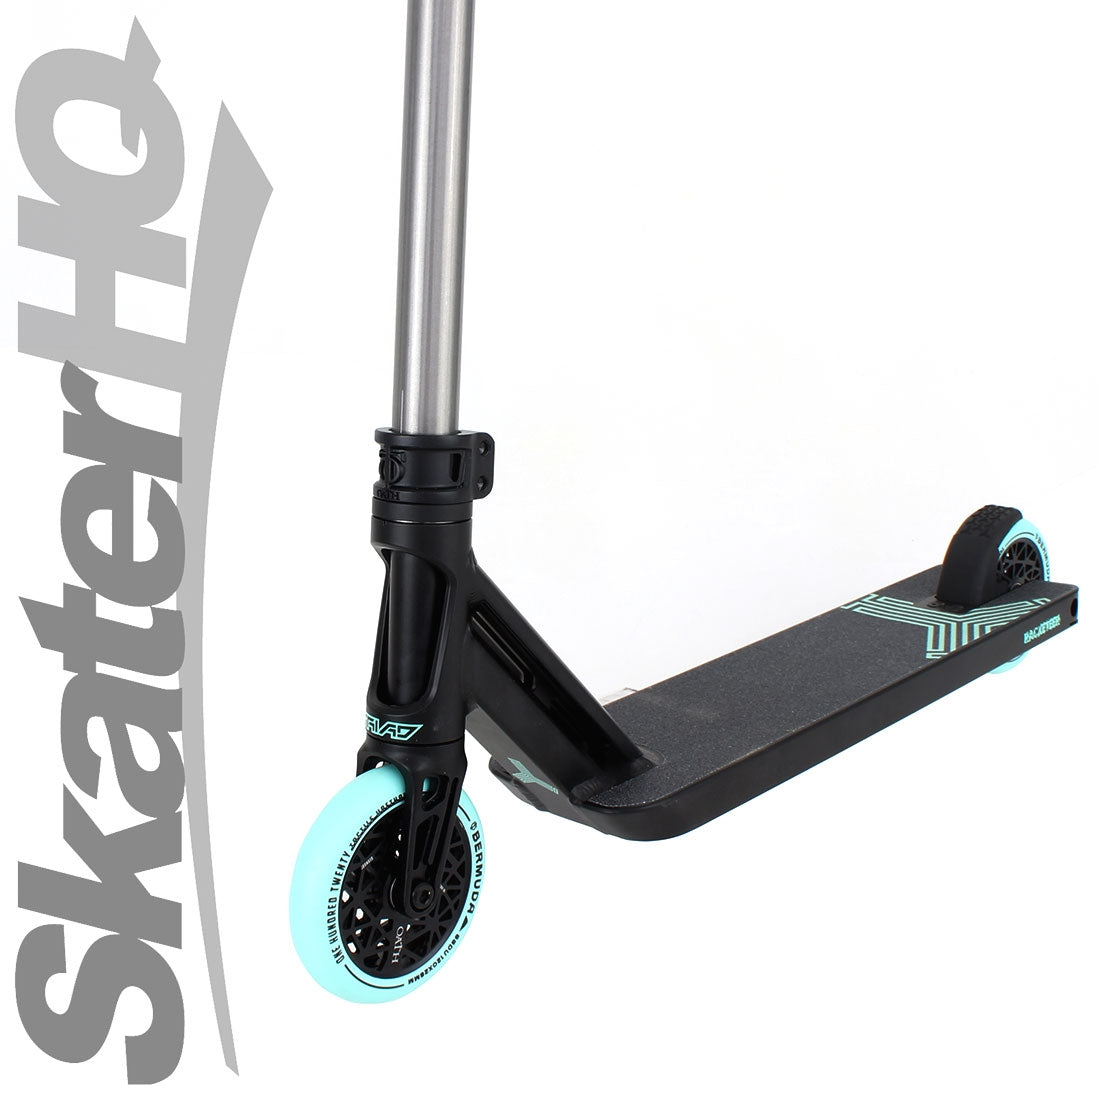 Triad Racketeer - Satin Black/Teal Scooter Completes Trick